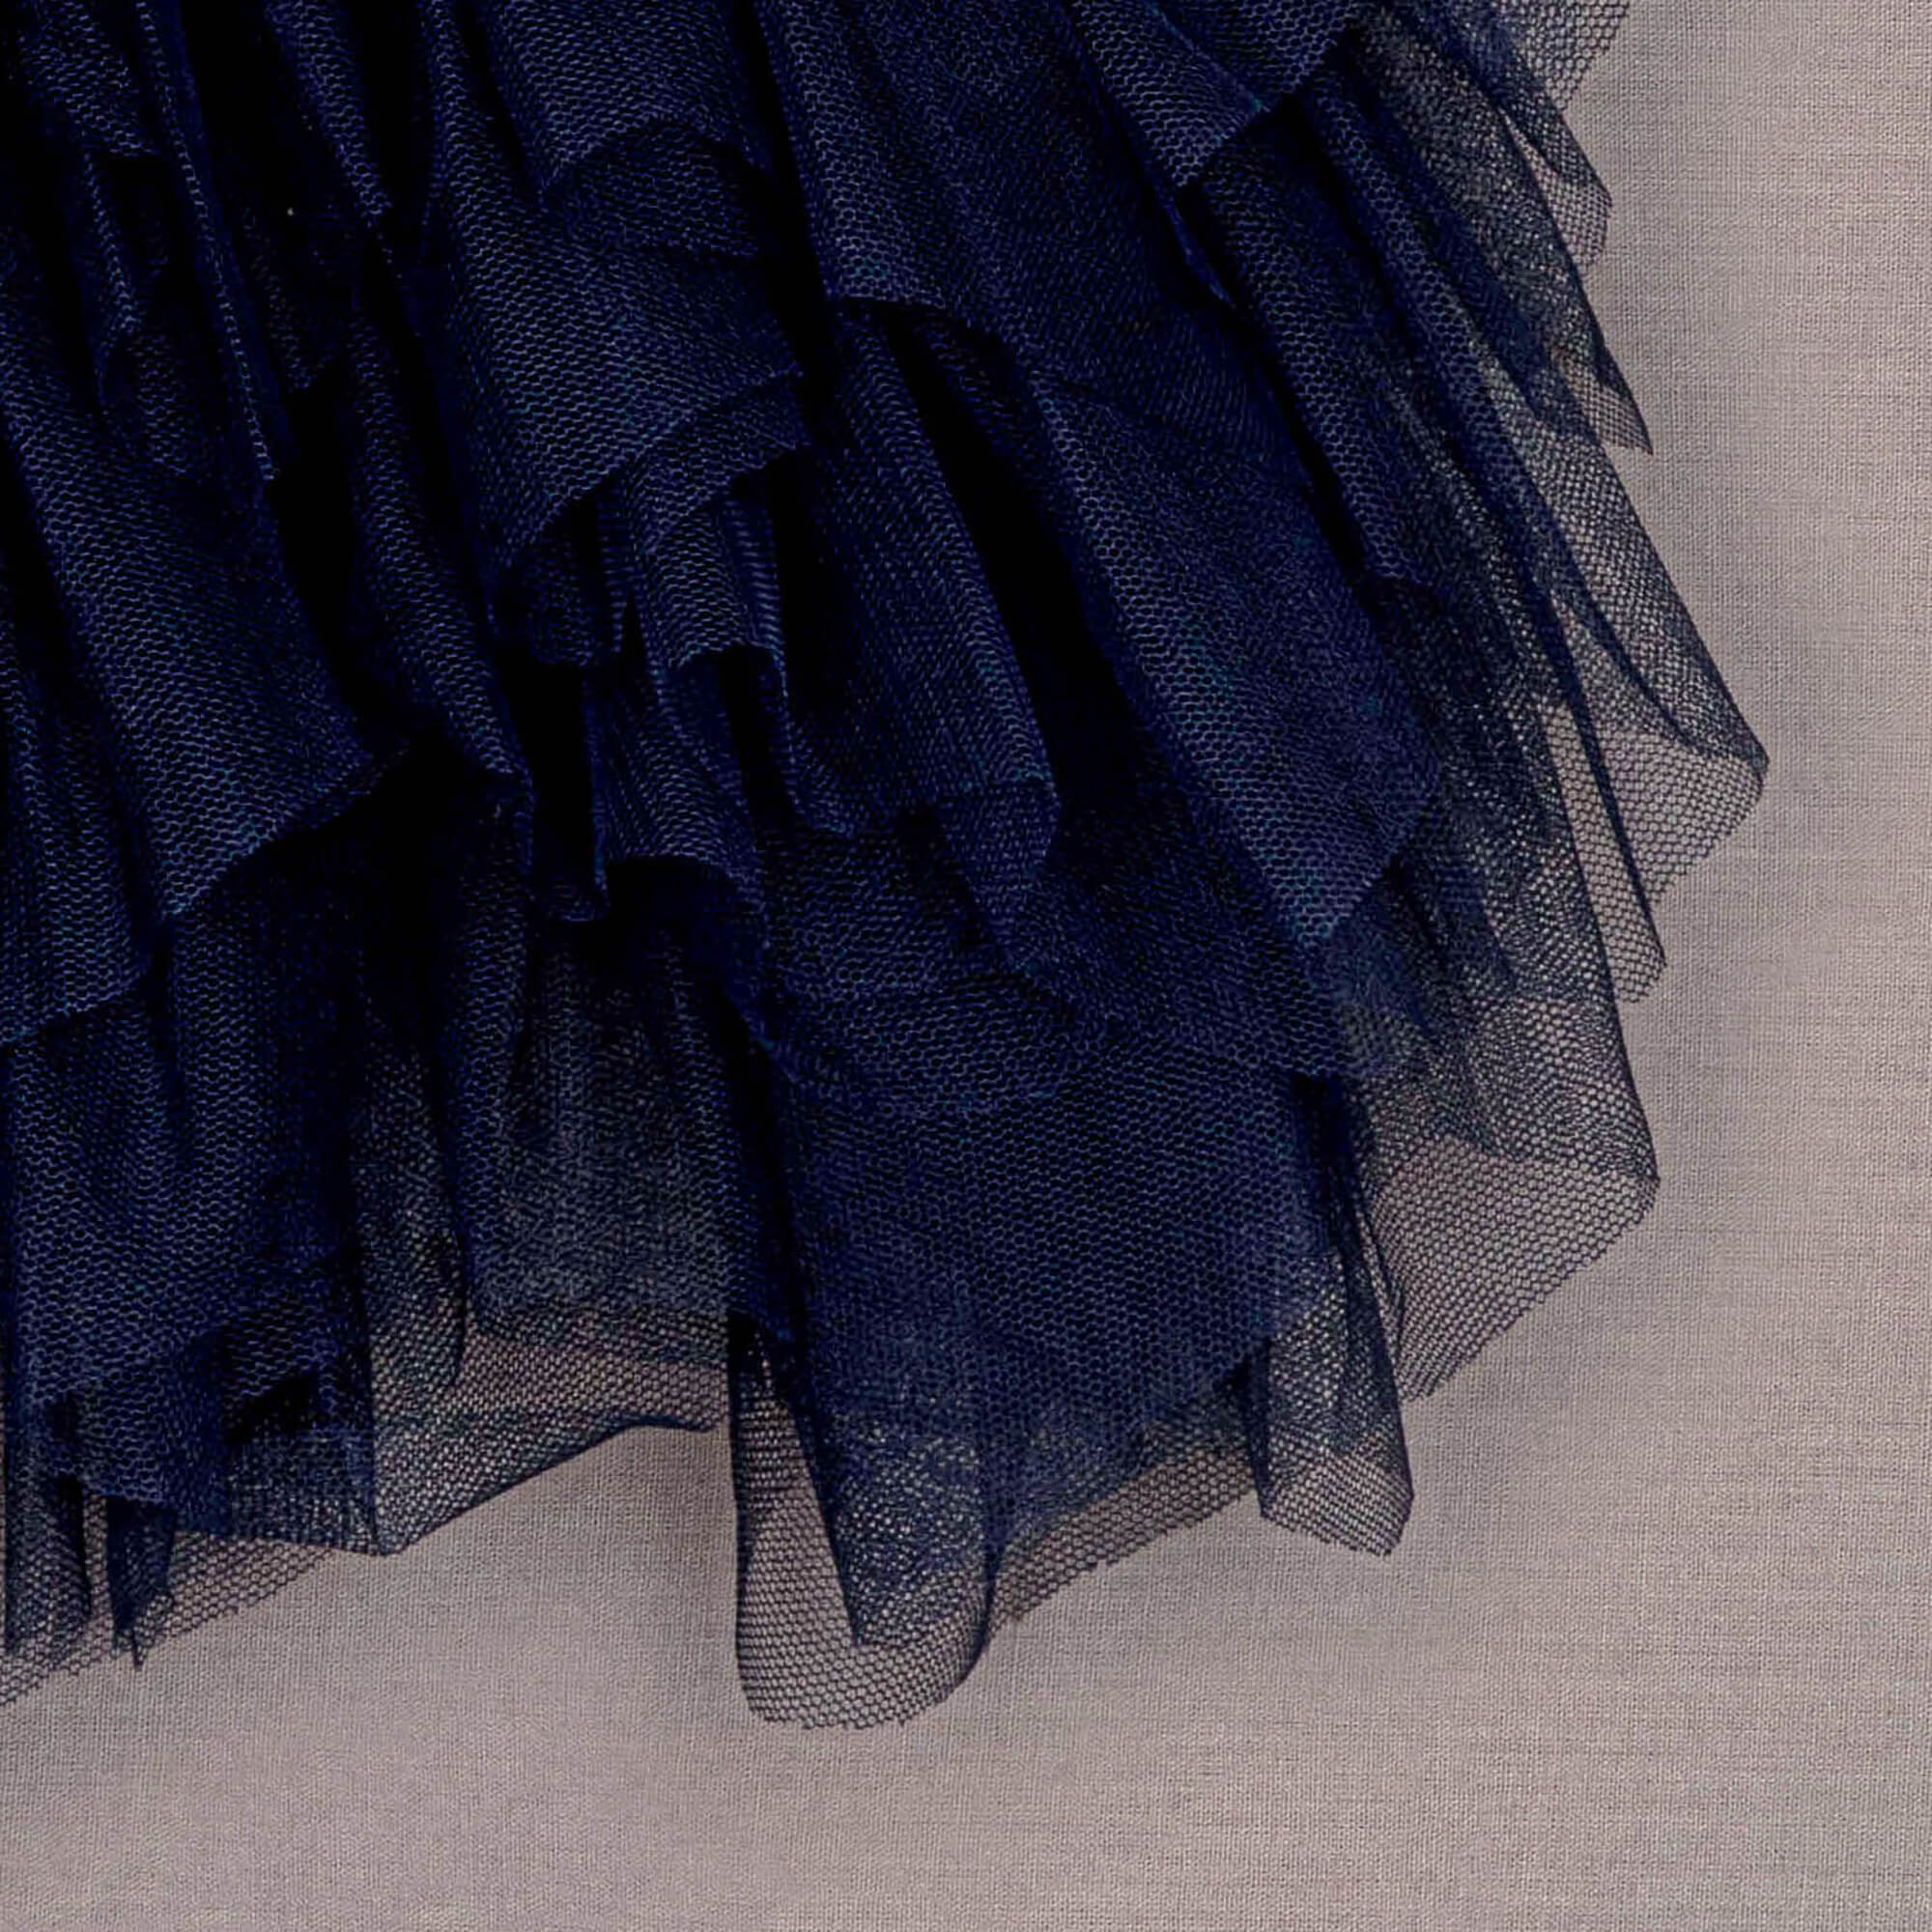 Tulle close up, navy blue